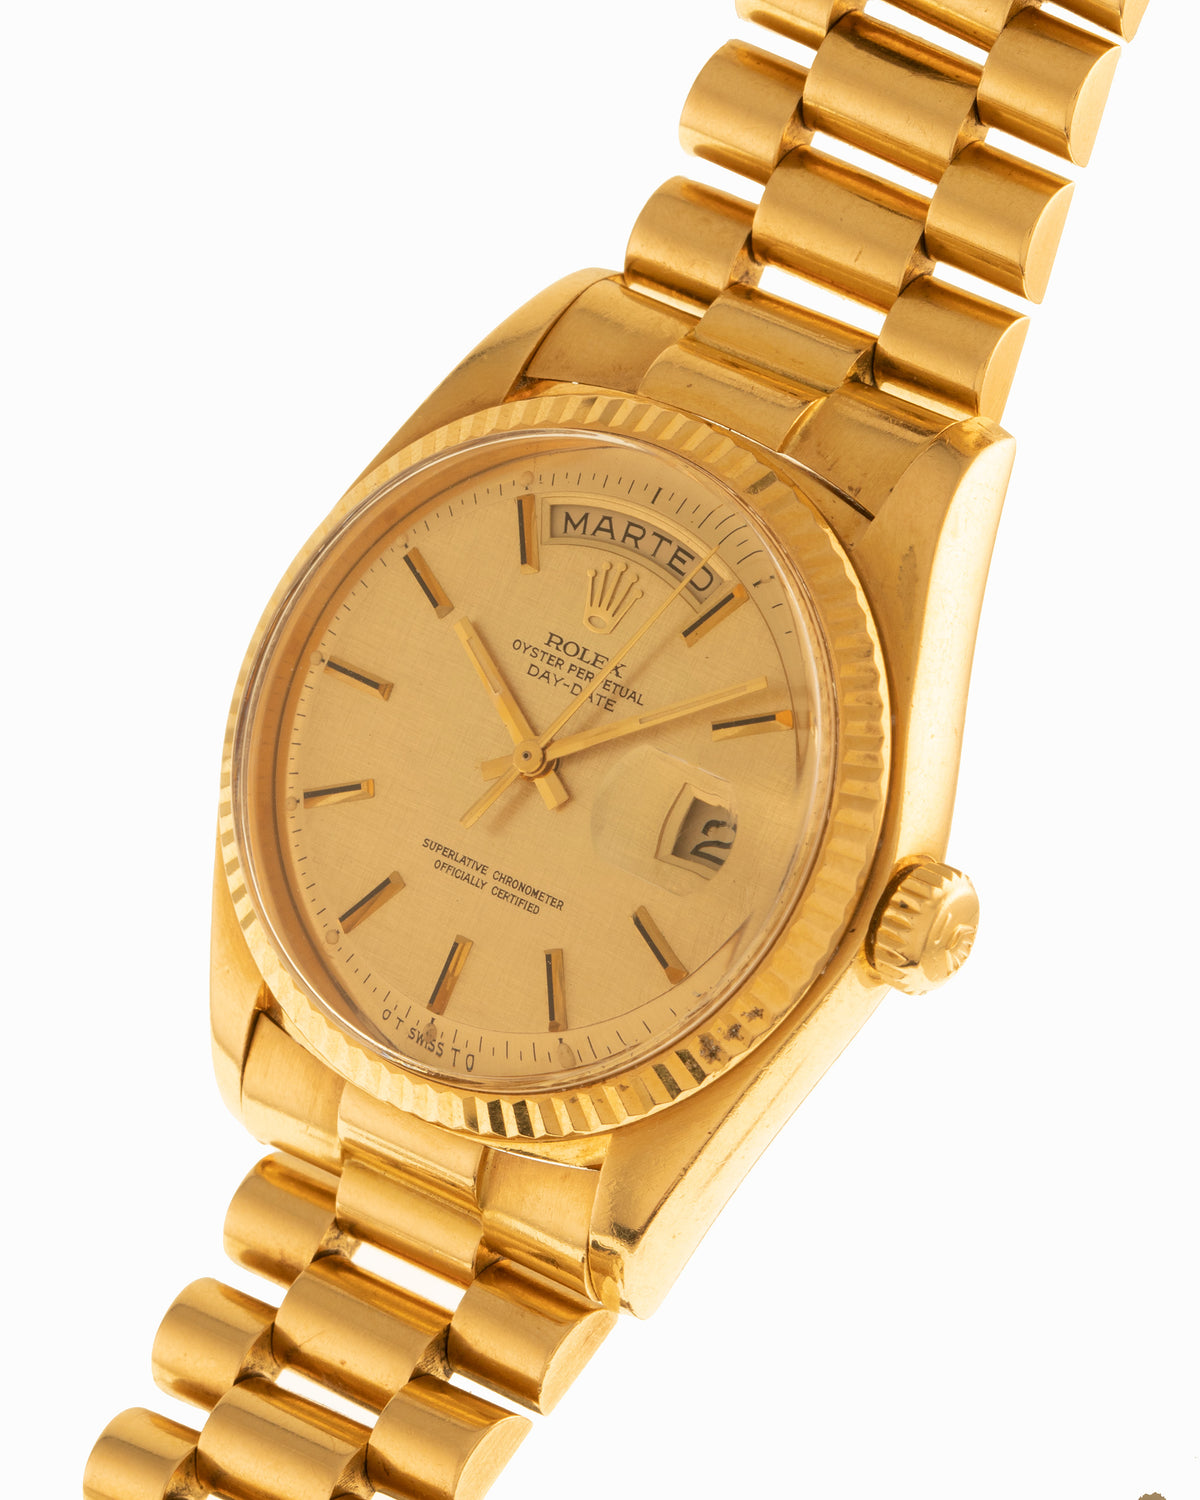 Rolex Oyster Perpetual Day Date with gold bracelet